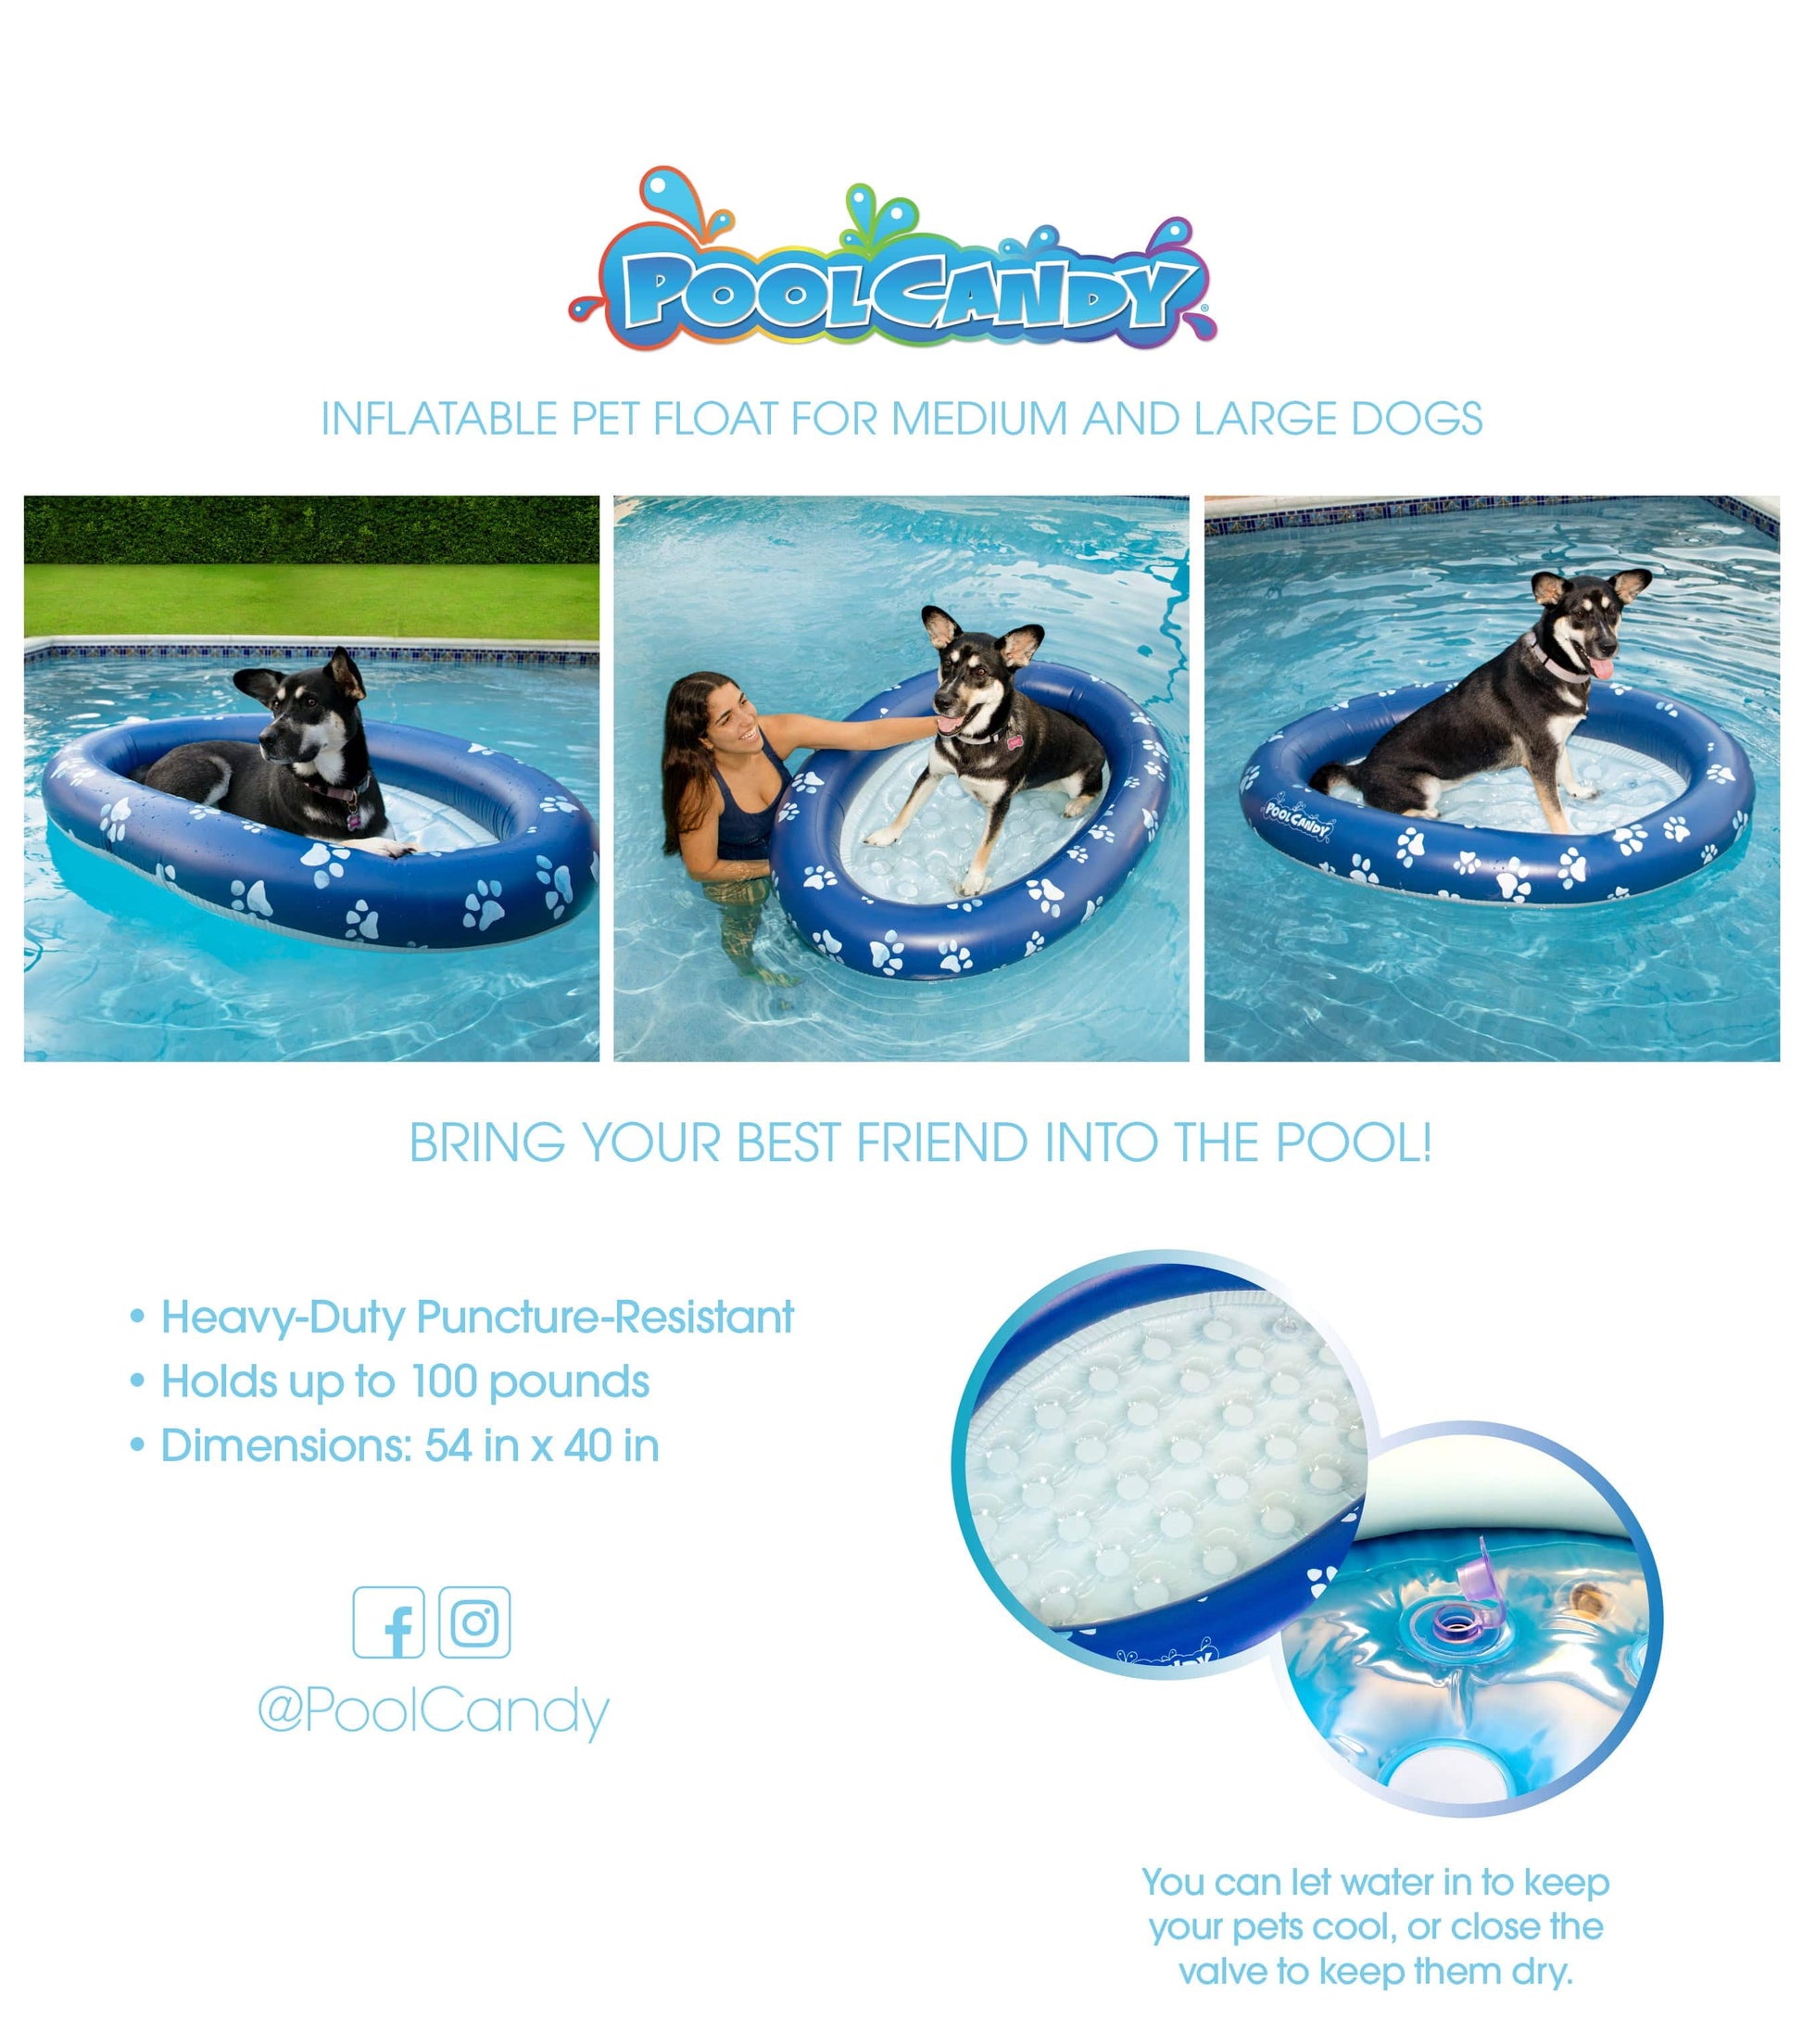 Pool Candy Inflatable Pet Float - Each